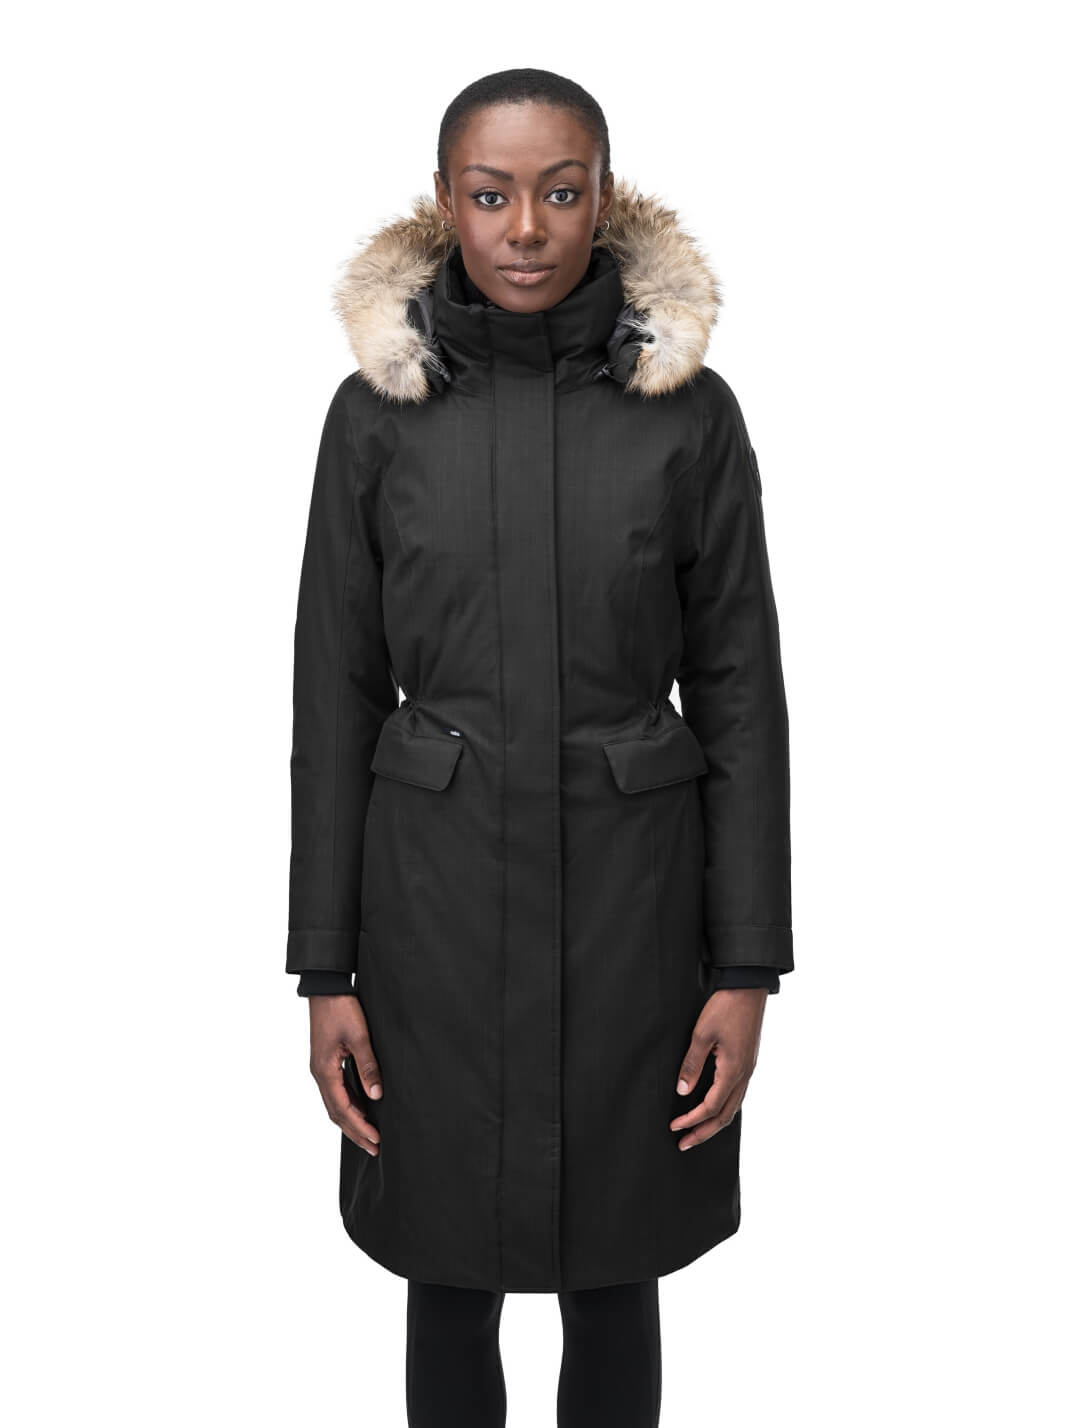 Zenith Ladies Knee Length Parka in knee length, Canadian duck down insulation, removable hood with removable fur ruff trim, and two-way front zipper, in Black